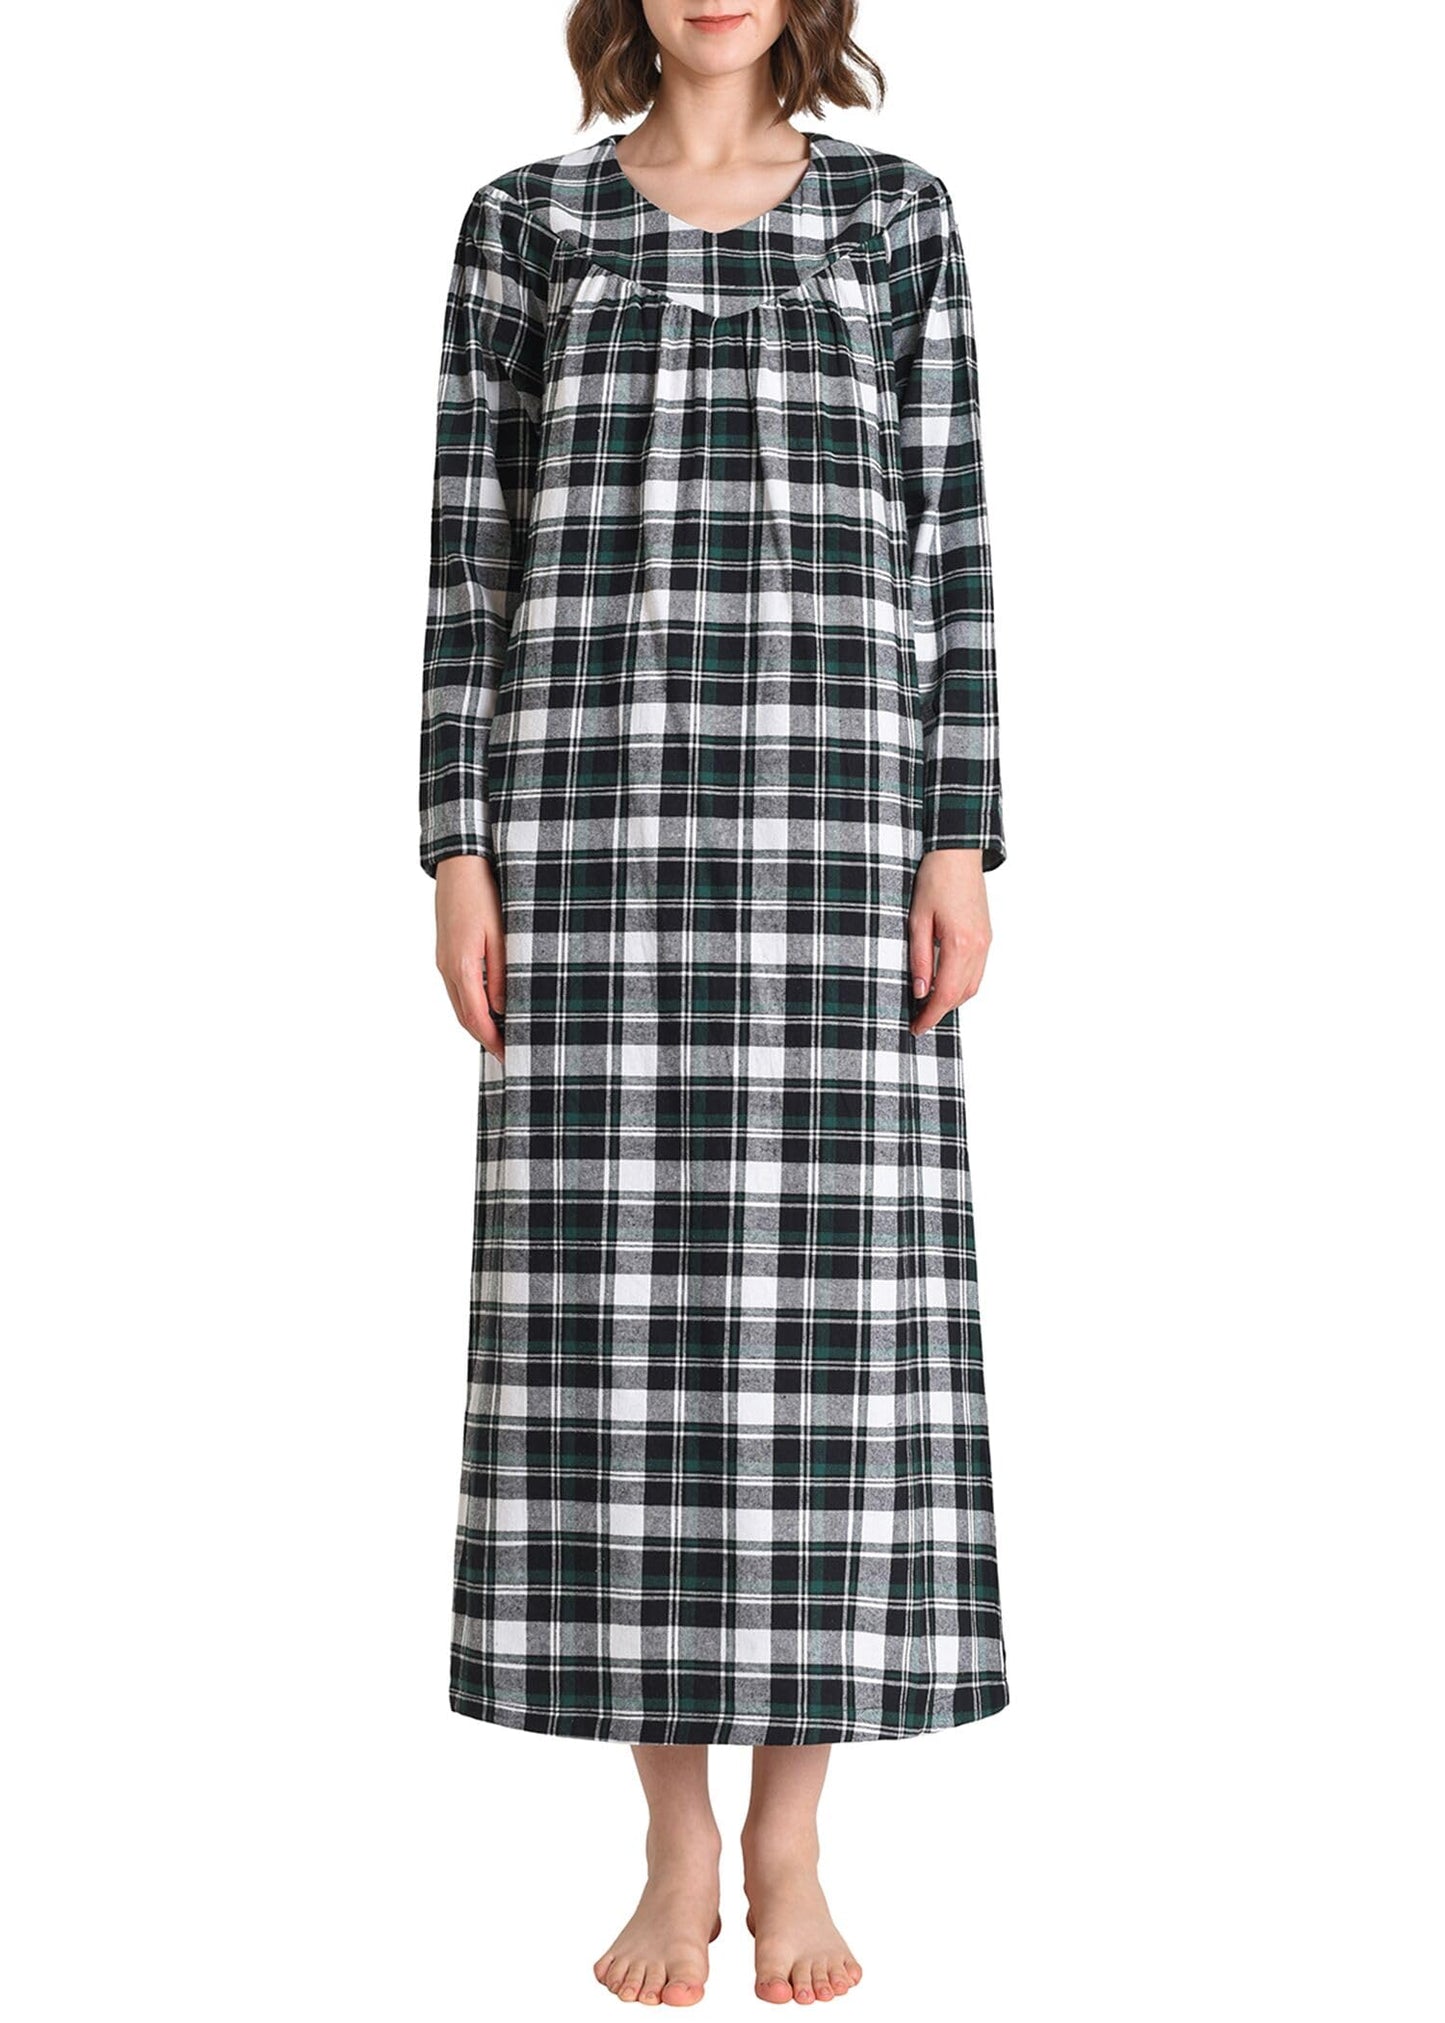 Women's Plaid Flannel Nightgown Long Sleeve V-Neck Nightgown with Pockets - Latuza